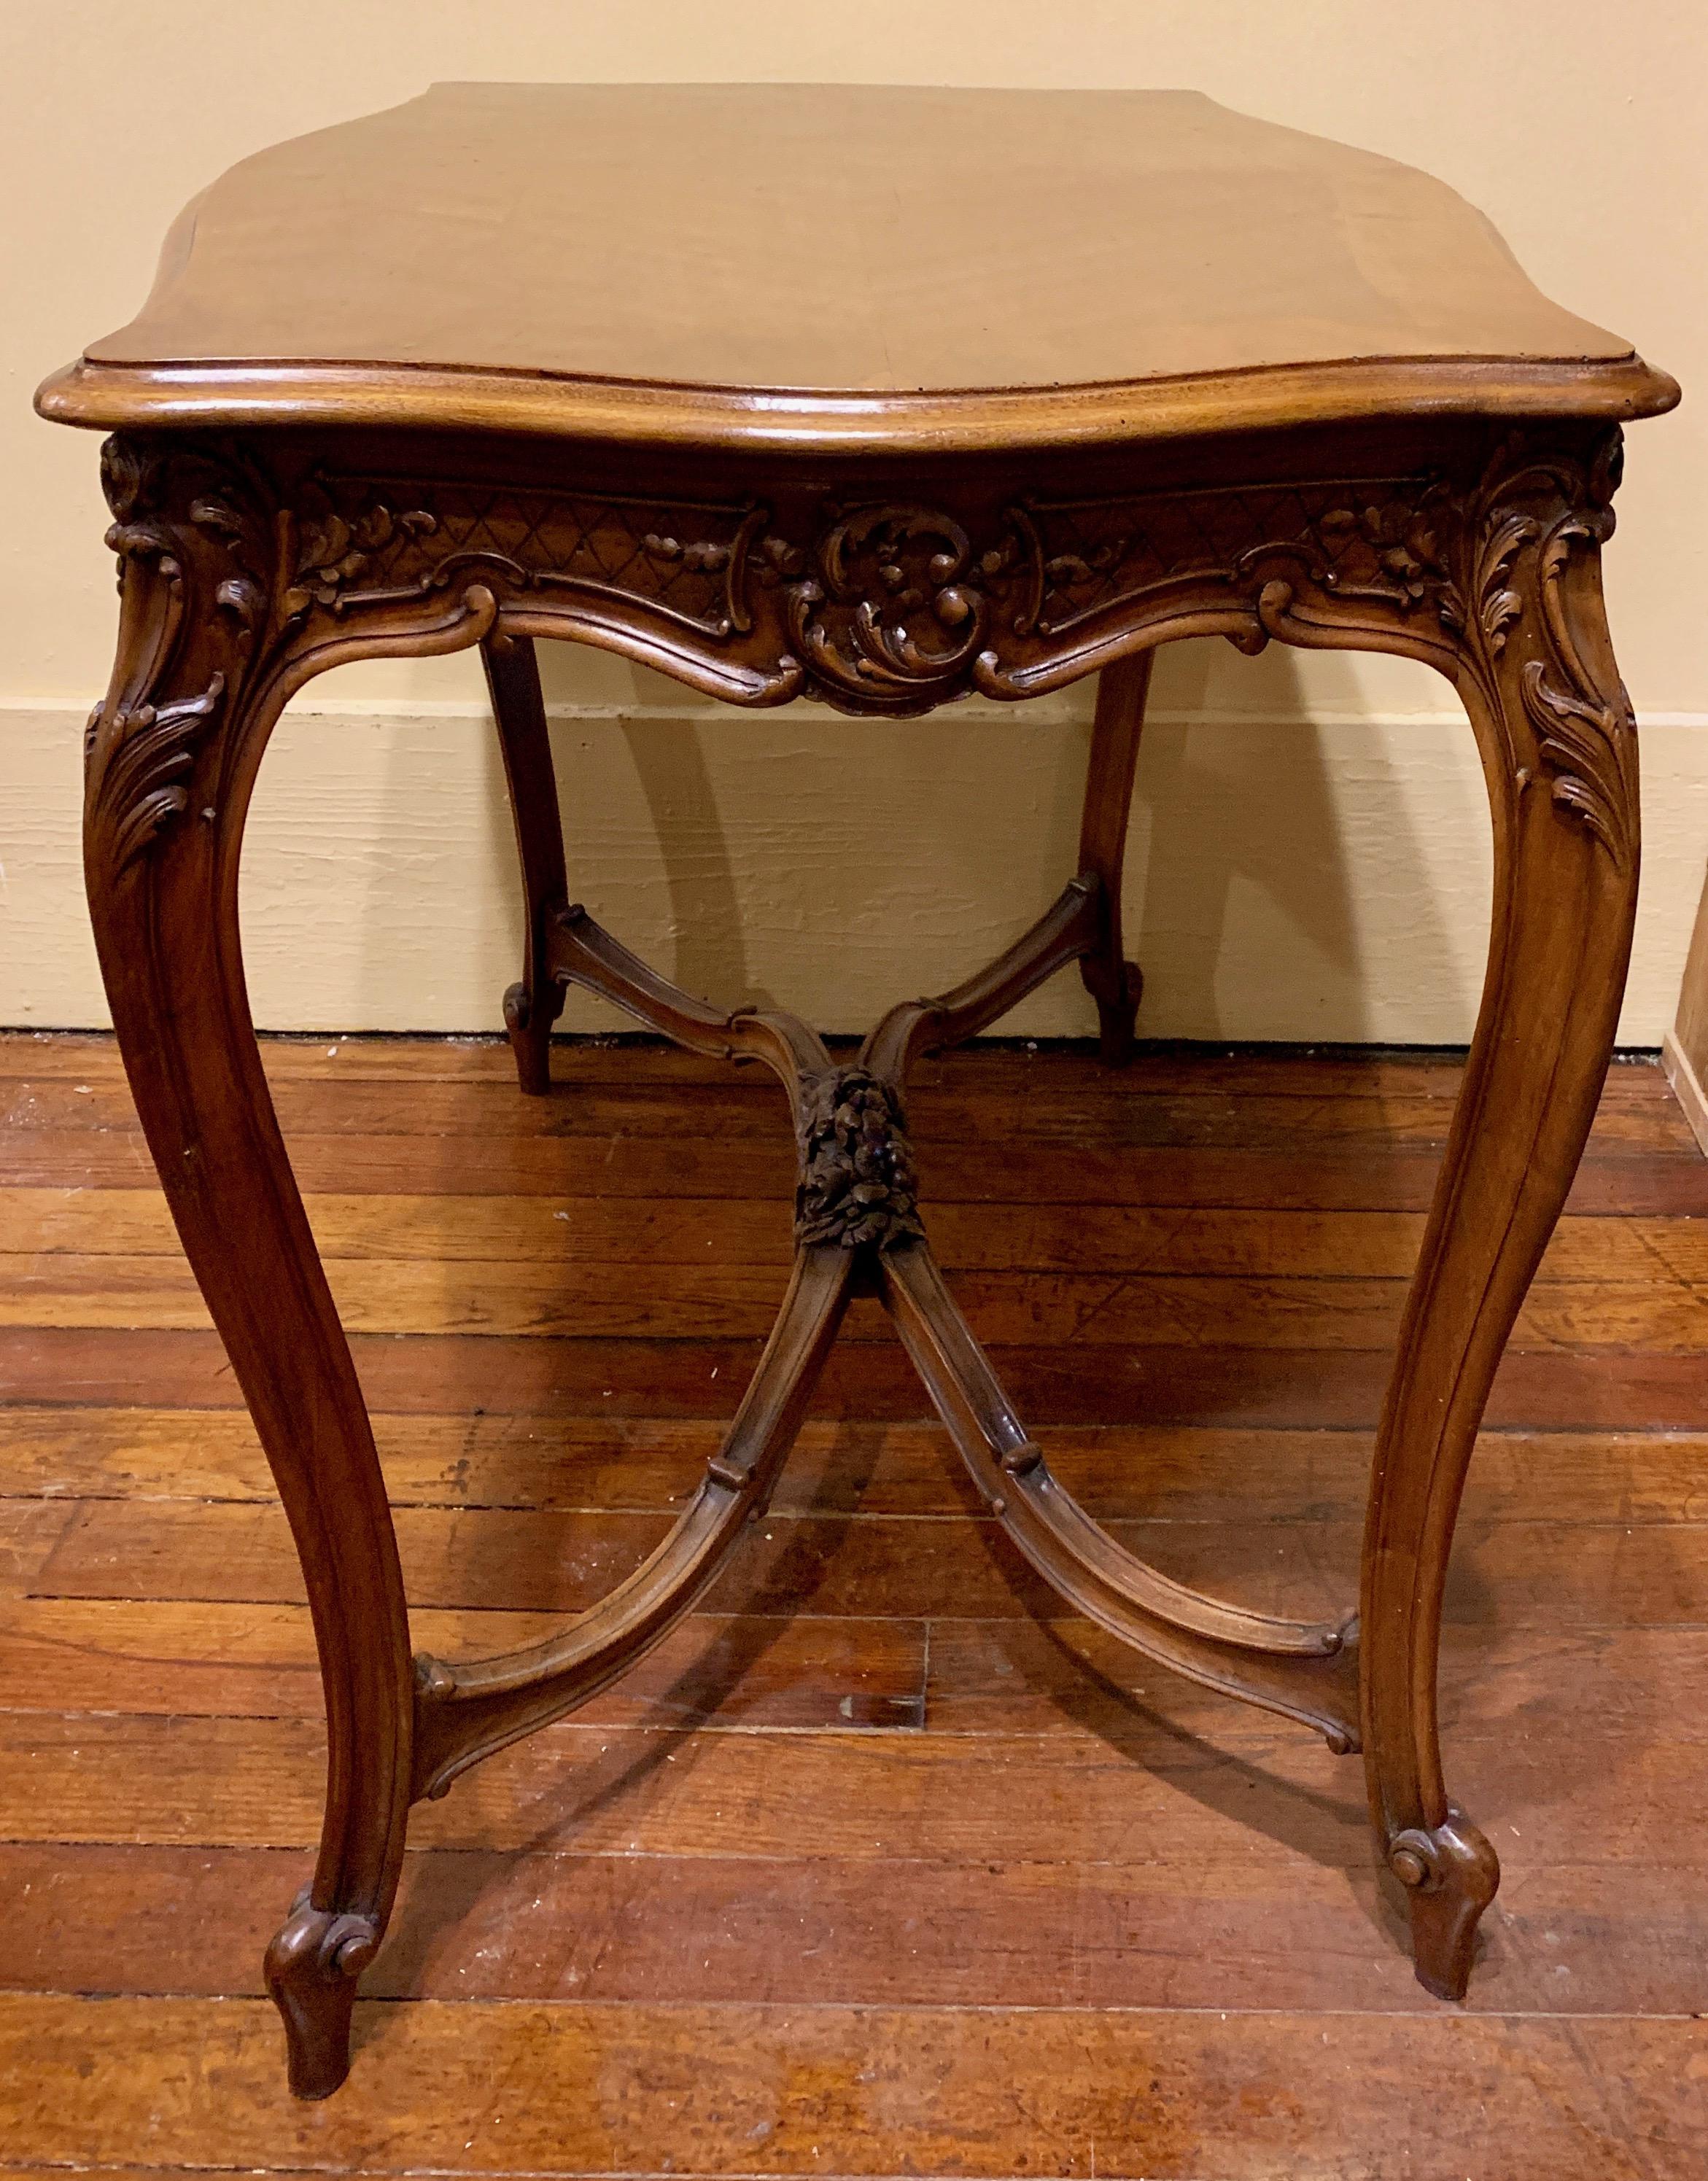 A pretty table with handsome carved elements and of a nice size, too.
 